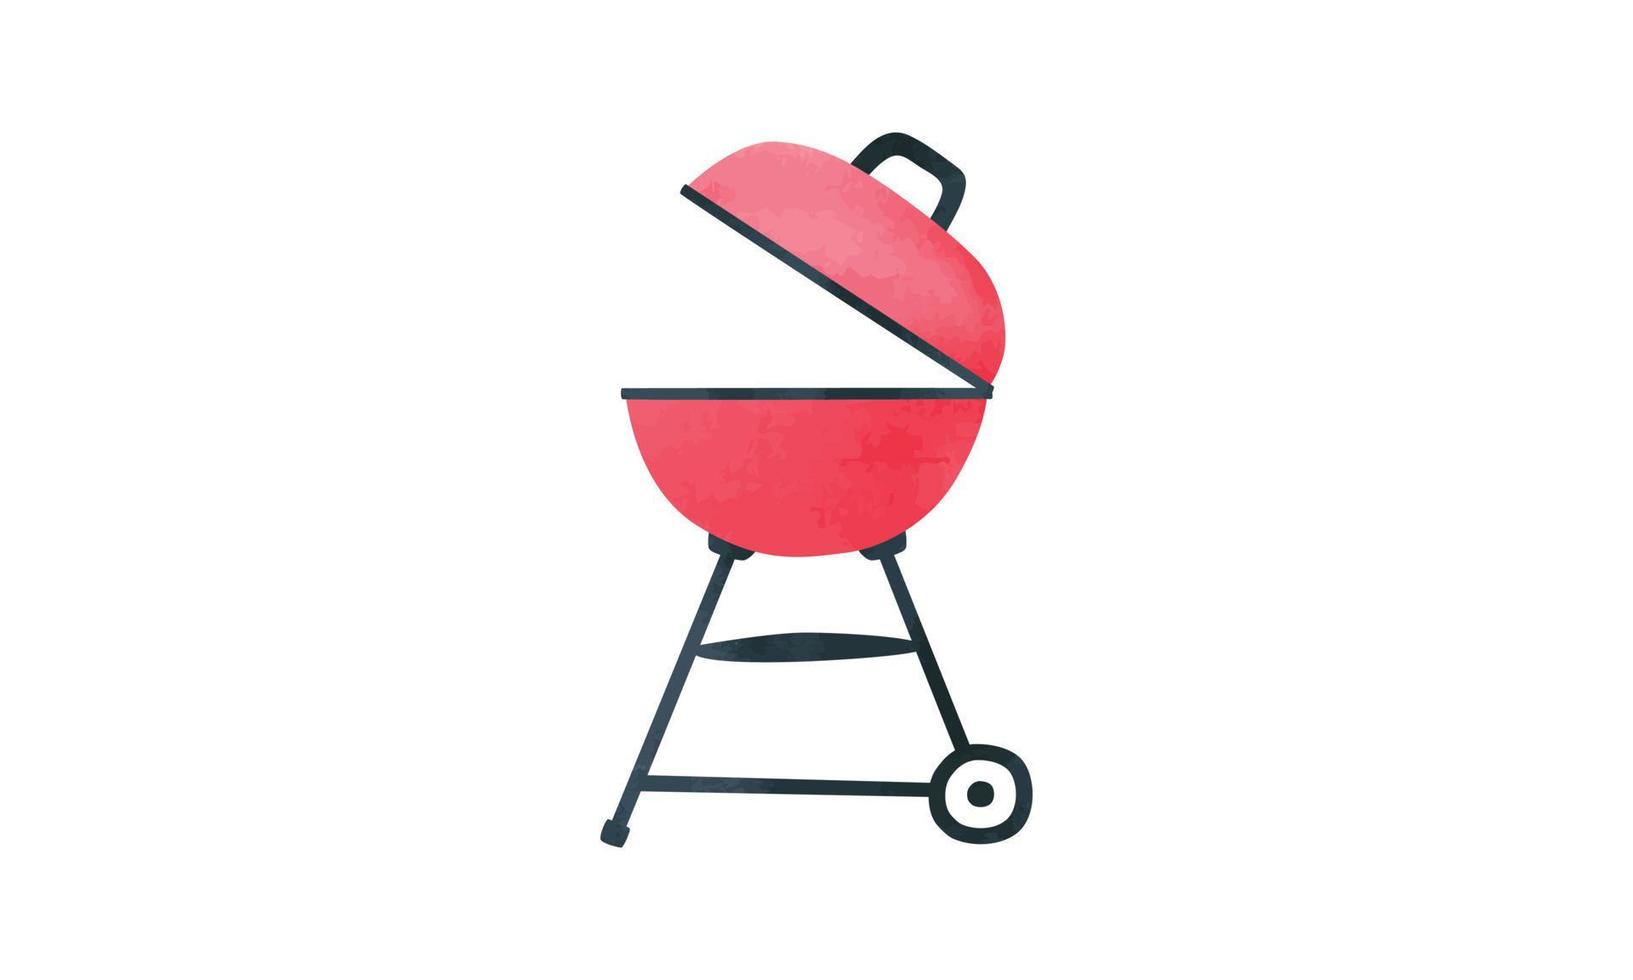 Red kettle barbecue grill watercolor style. Round barbecue grill vector illustration isolated on white background. Kettle barbecue grill clipart. Barbecue grill cartoon drawing. Device for frying food